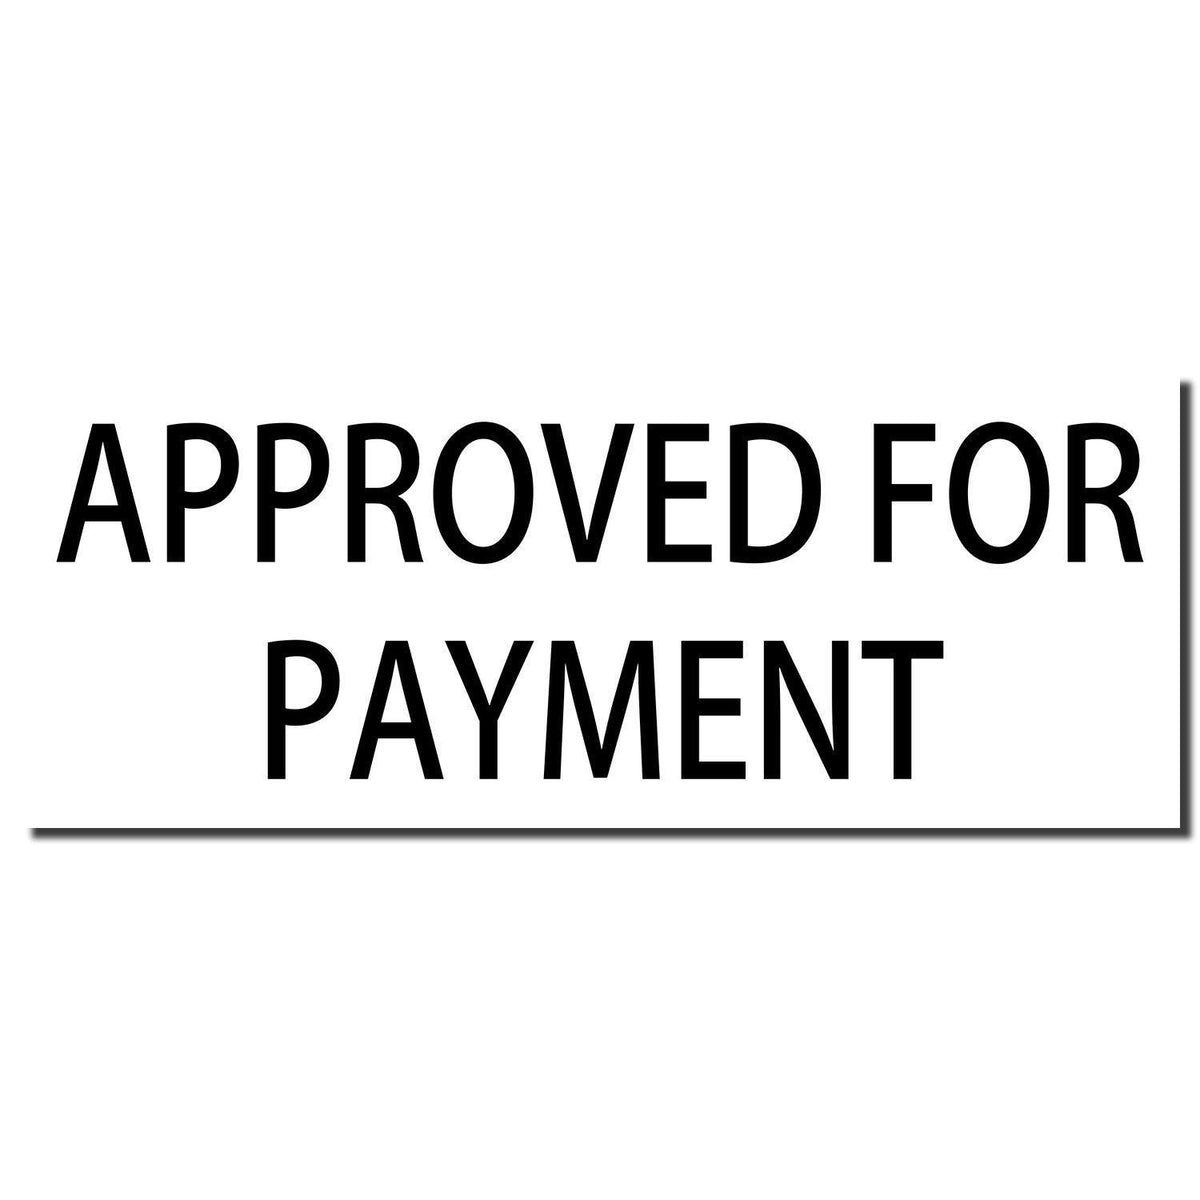 Enlarged Imprint Approved For Payment Rubber Stamp Sample